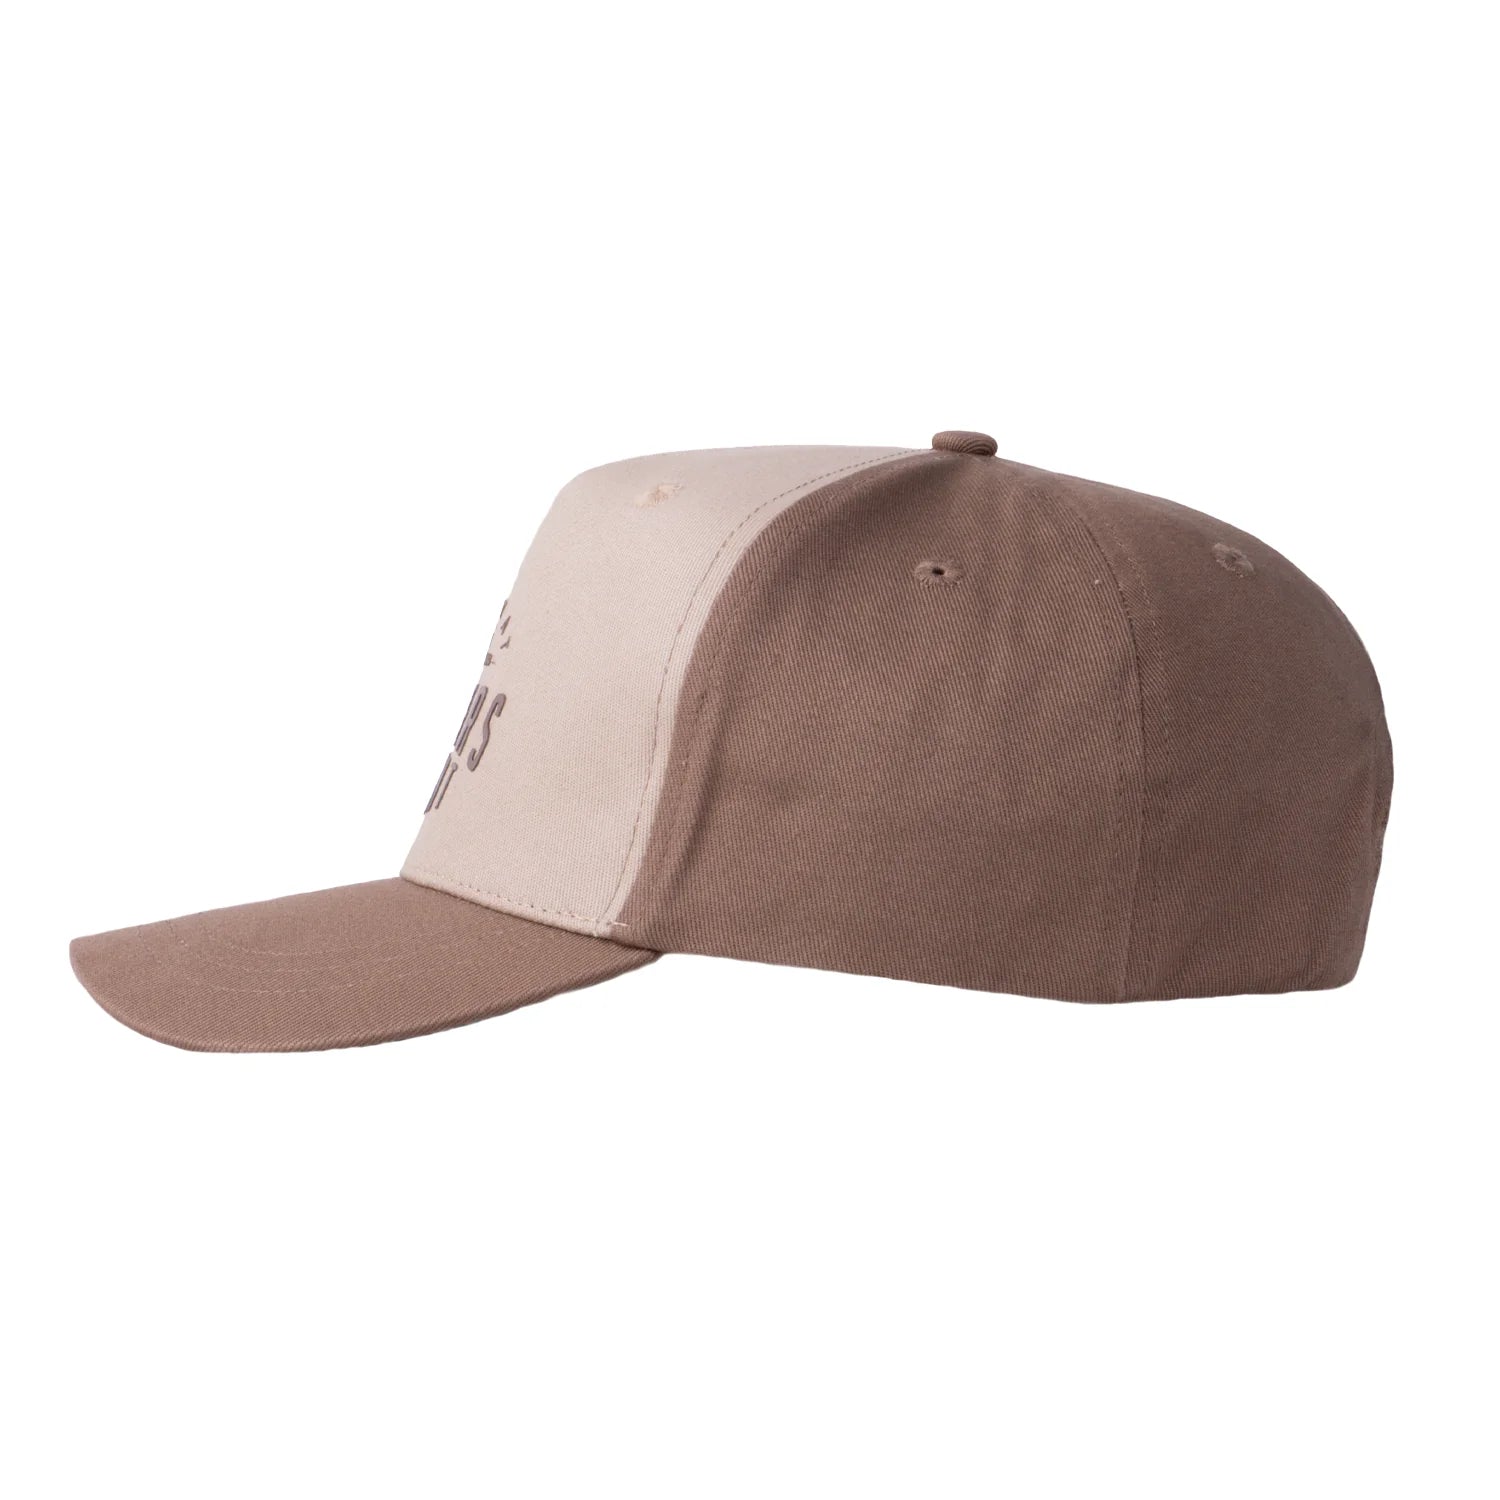 Hunters Element Wilson Cap - Brown/Light Brown -  - Mansfield Hunting & Fishing - Products to prepare for Corona Virus